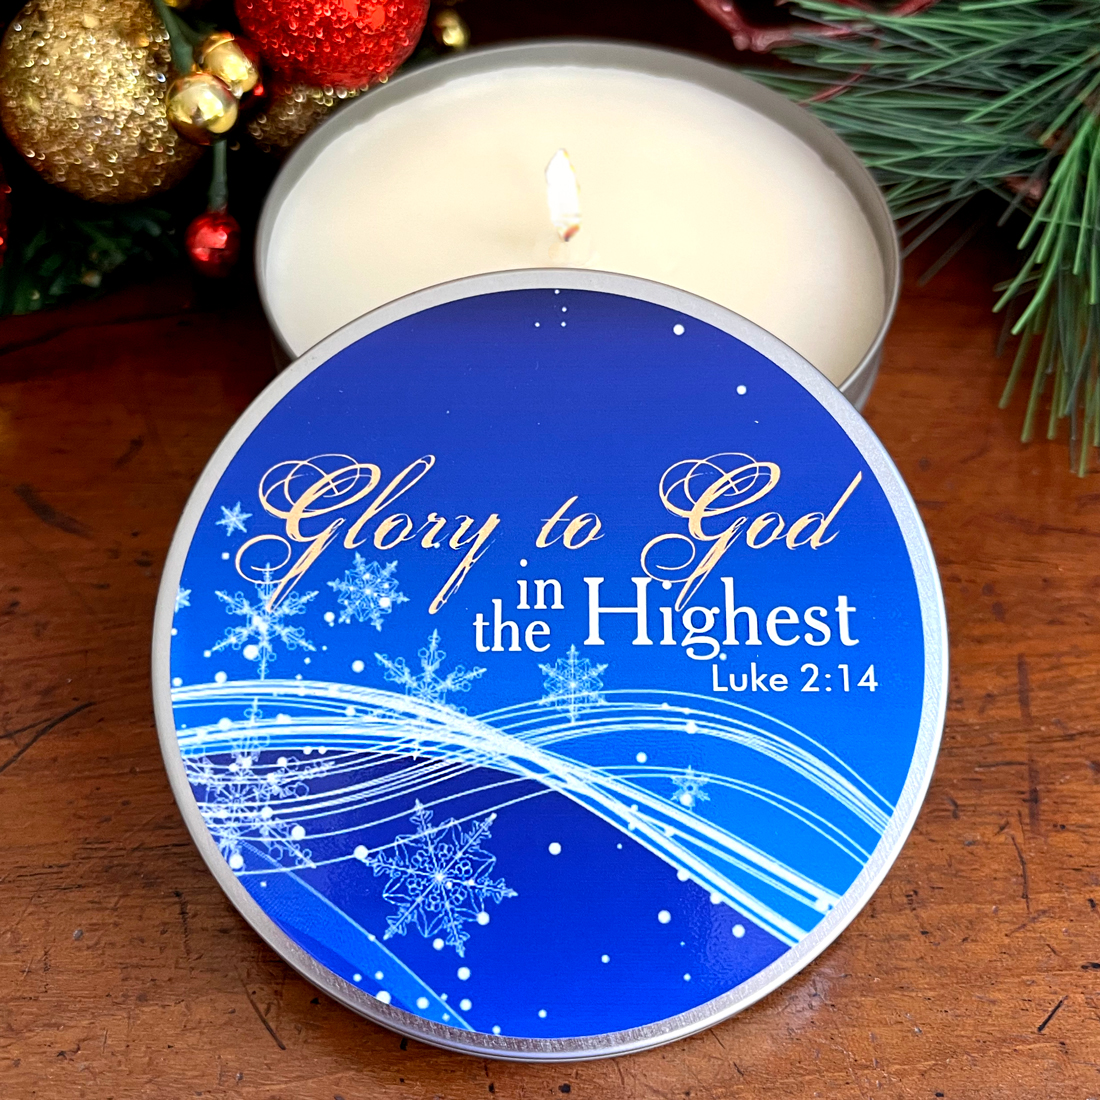 "GLORY TO GOD IN THE HIGHEST" CANDLE - FRANKINCENSE & MYRRH